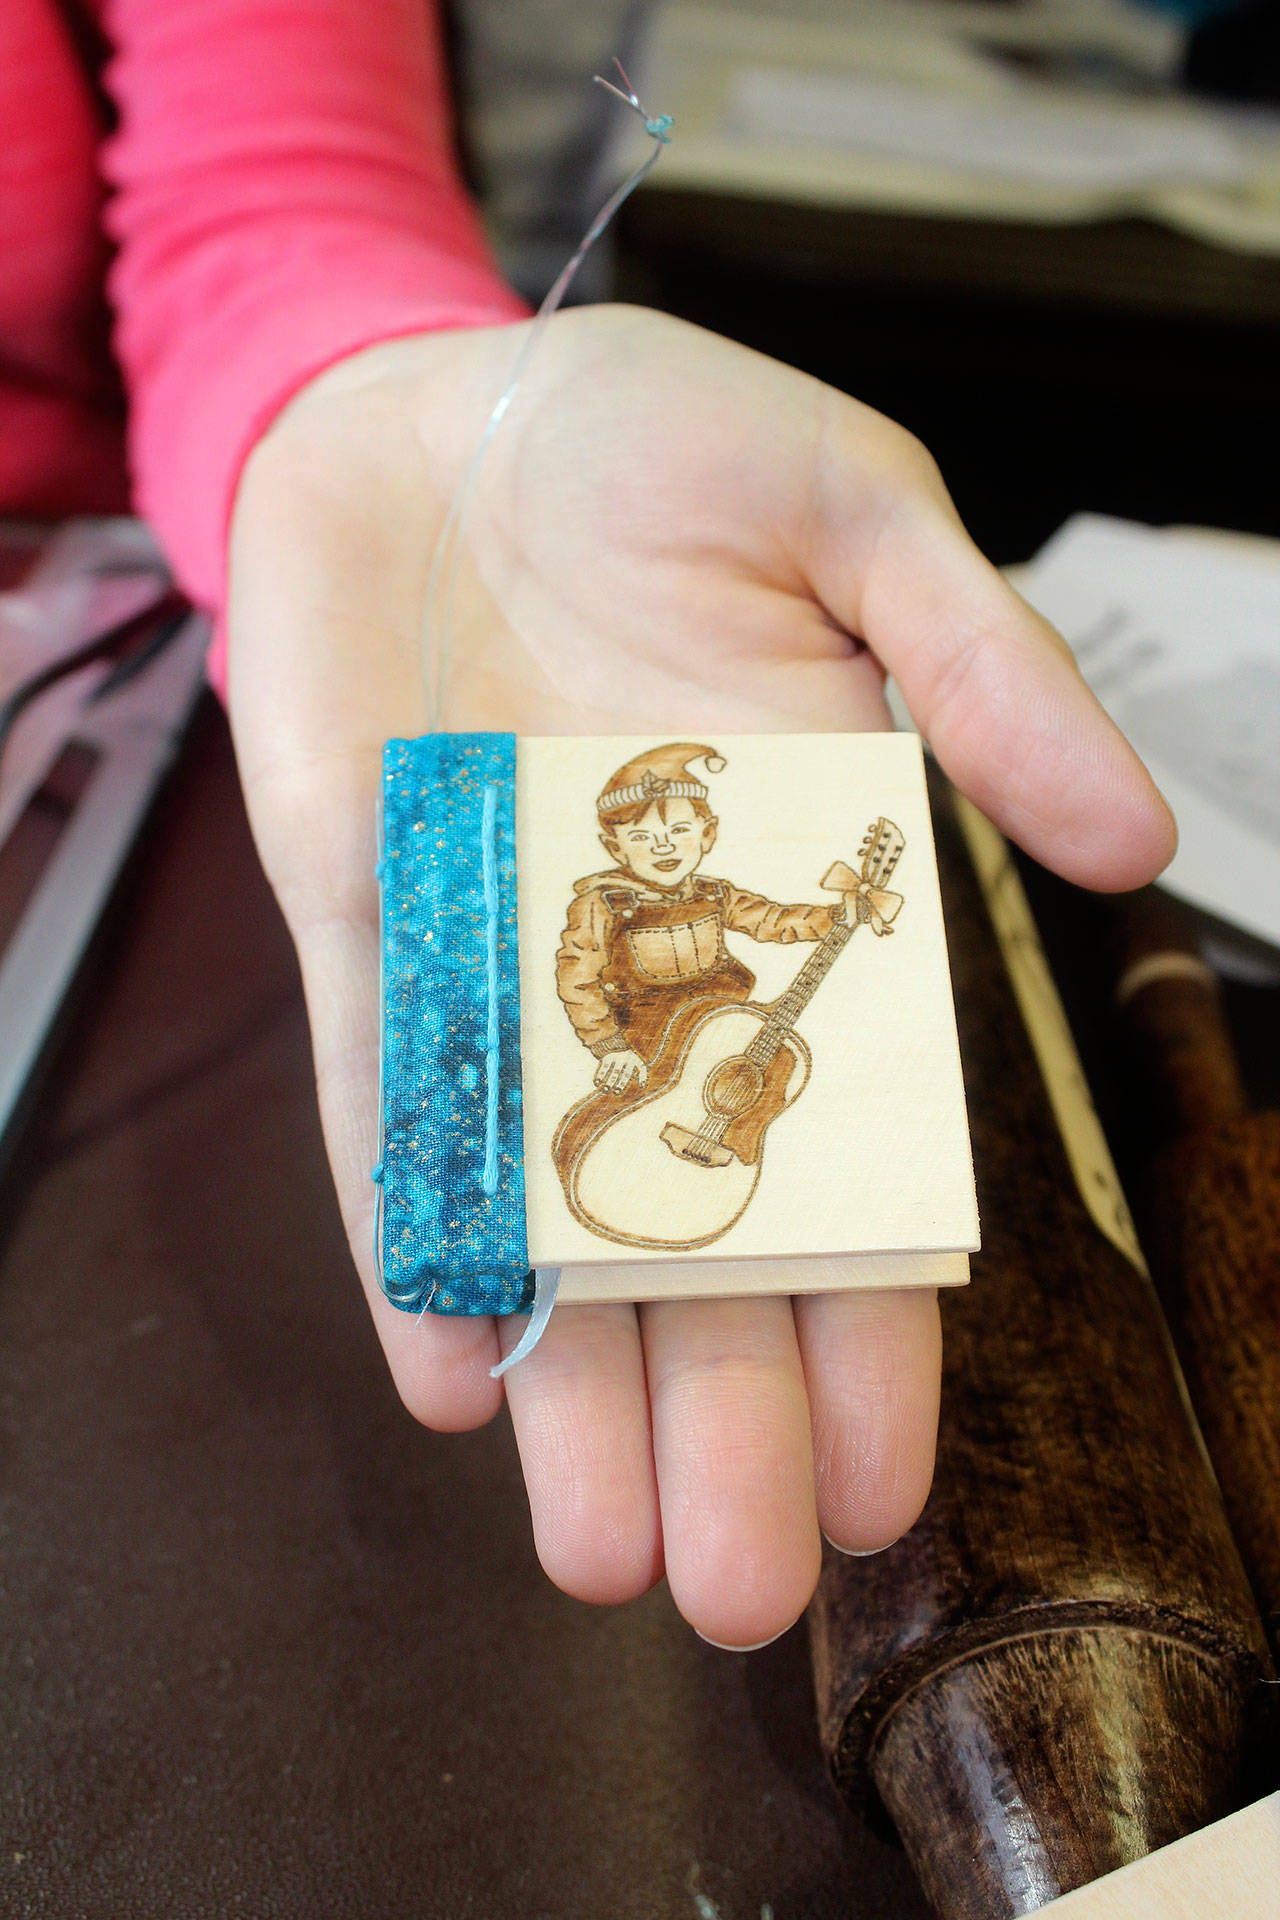 Here’s an example of one of April Shelton’s tiny, handmade books. She decorates the wooden covers and gives them away to children in memory of her late father. She learned book making at the Port Orchard Library.                                Terryl Asla / Kitsap News Group